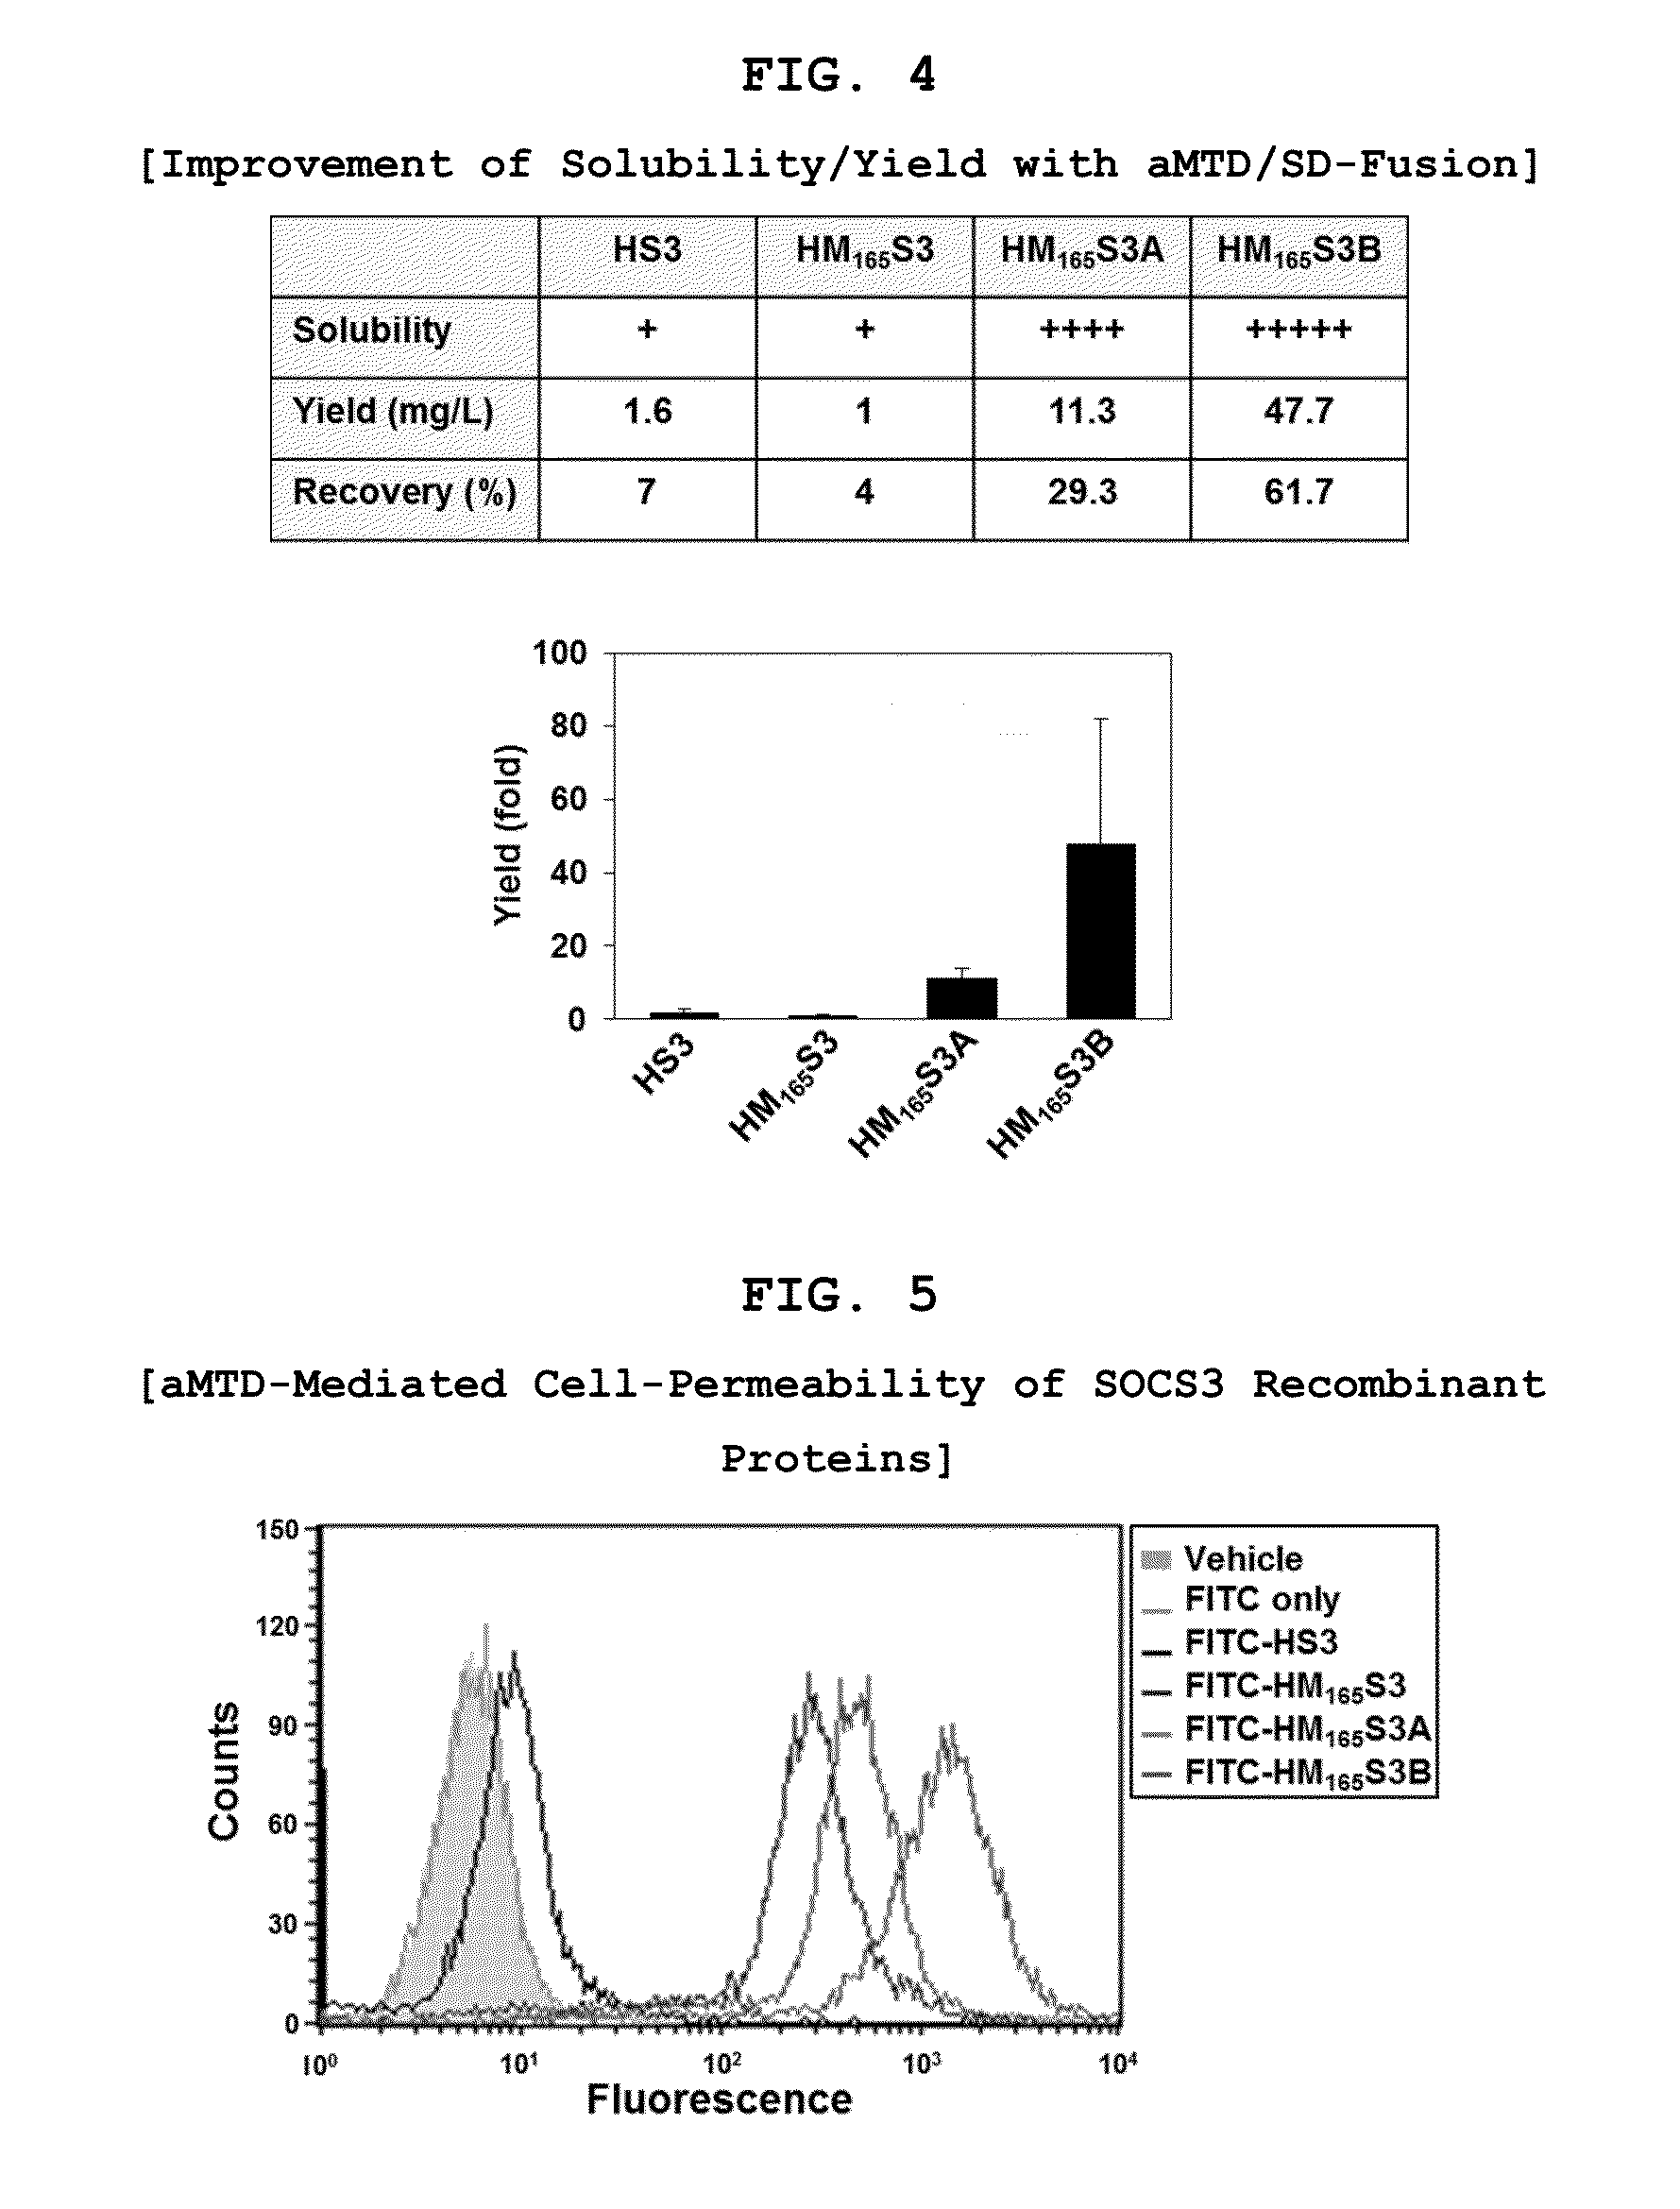 Development of Protein-Based Biotherapeutics That Penetrates Cell-Membrane and Induces Anti-Hepatocellular Carcinoma Effect - Improved Cell-Permeable Suppressor of Cytokine Signaling (iCP-SOCS3) Proteins, Polynucleotides Encoding the Same, and Anti-Hepatocellular Carcinoma Compositions Comprising the Same